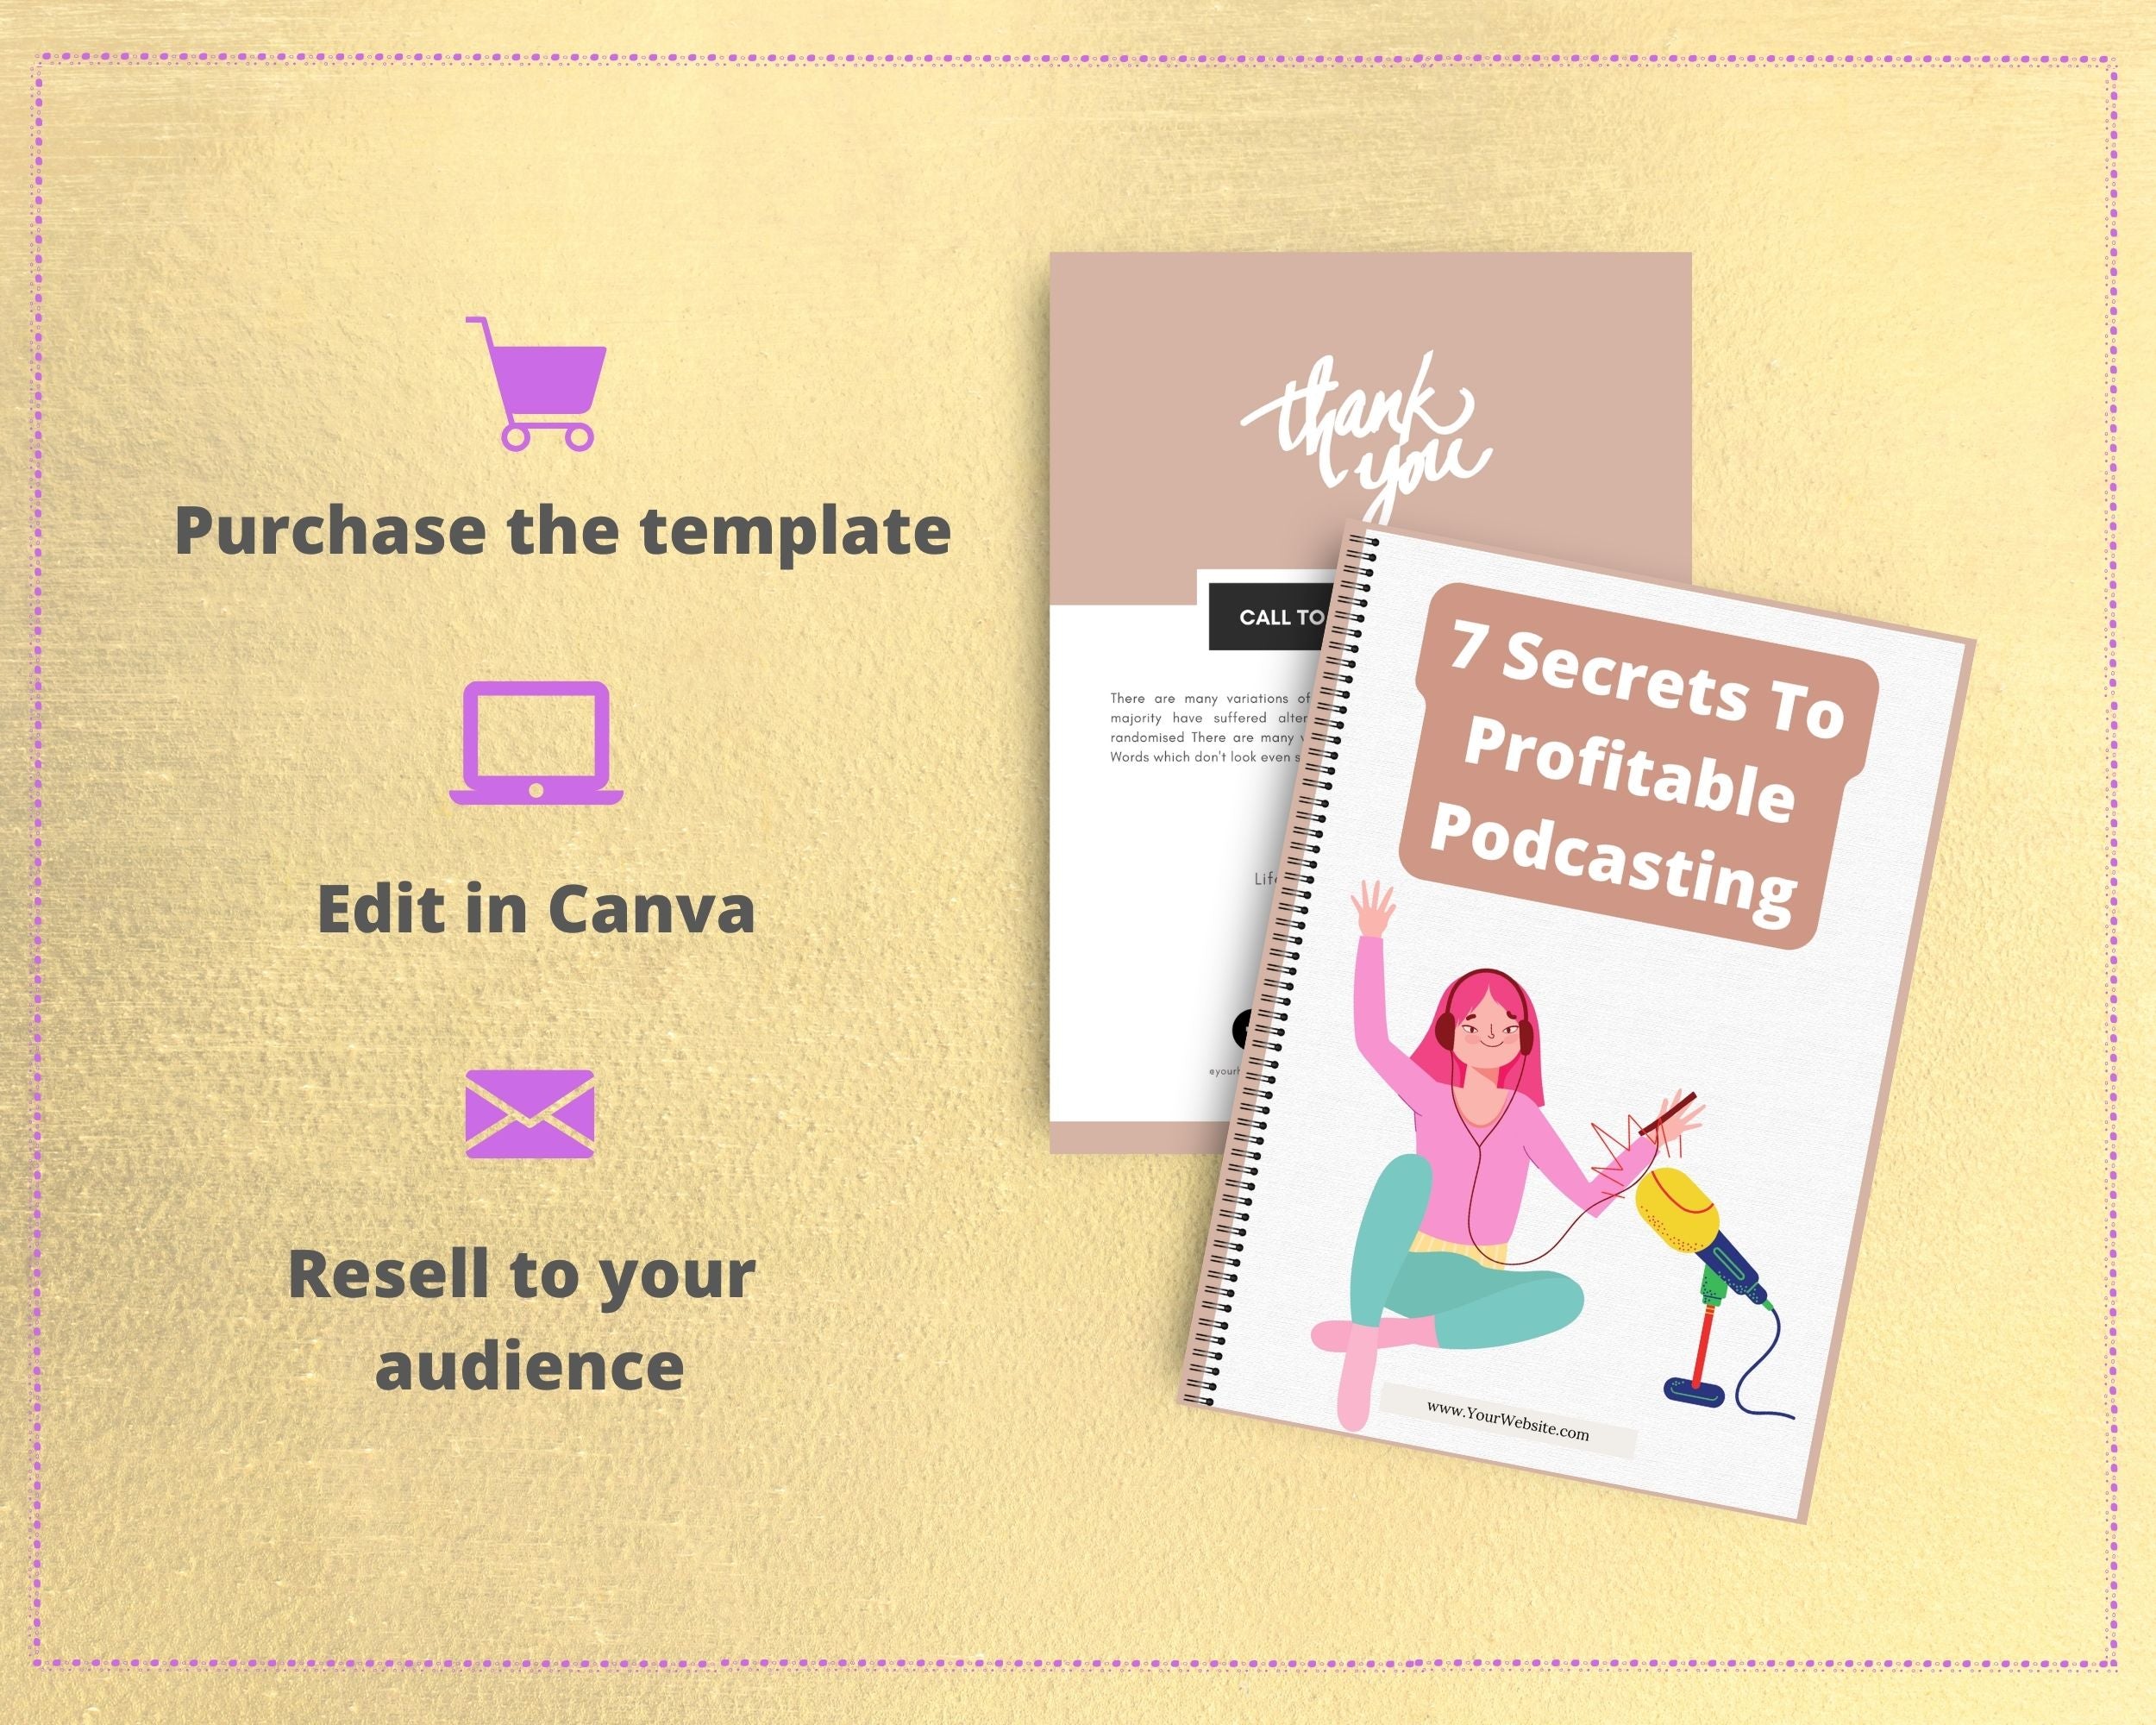 Editable 7 Secrets To Profitable Podcasting Ebook | Done-for-You Ebook in Canva | Rebrandable and Resizable Canva Template